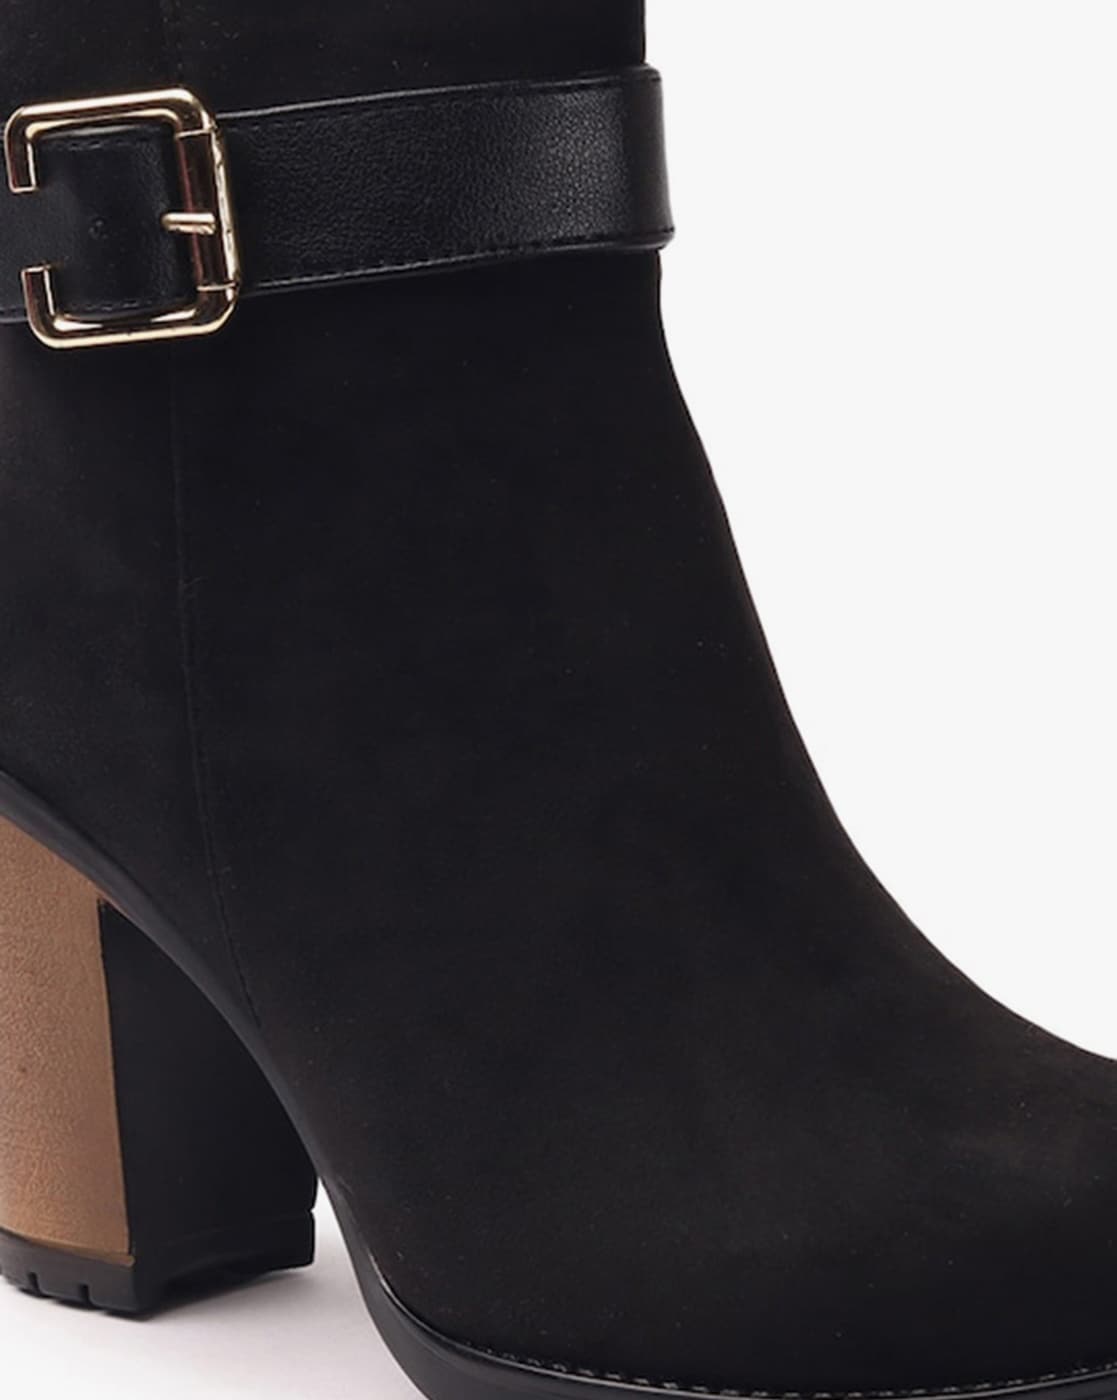 Stretch high-heel ankle boots - Women's fashion | Stradivarius United States